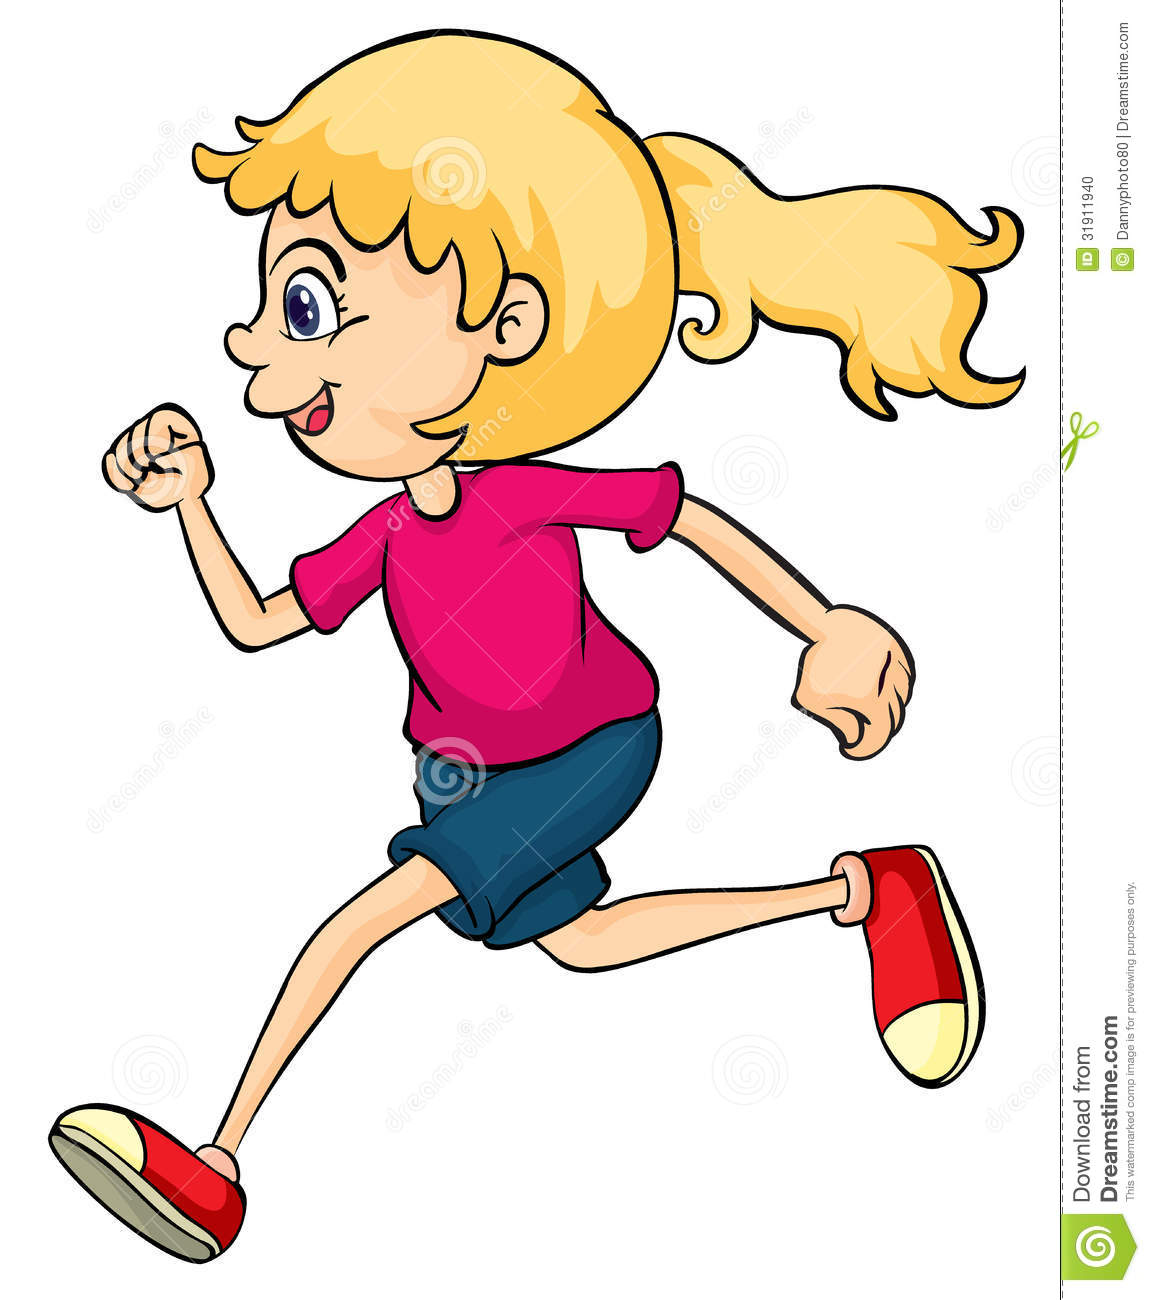 Clip art free, Running and .